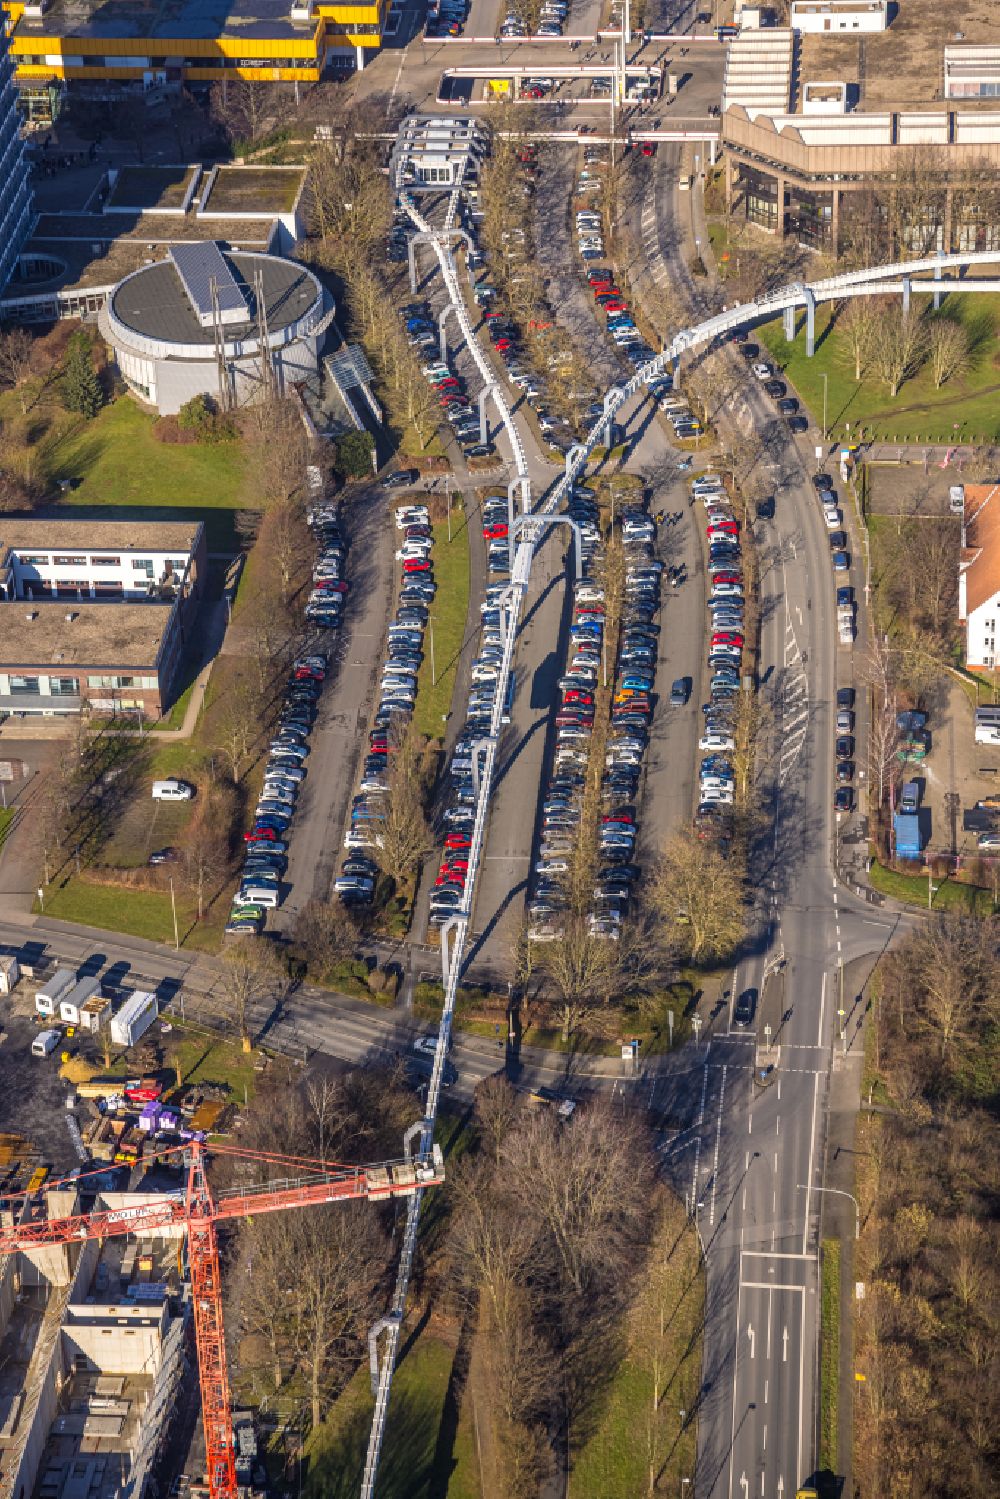 Dortmund from above - Route of the H-Bahn21 on Vogelpothsweg in the district of Barop in Dortmund in the Ruhr area in the state of North Rhine-Westphalia, Germany